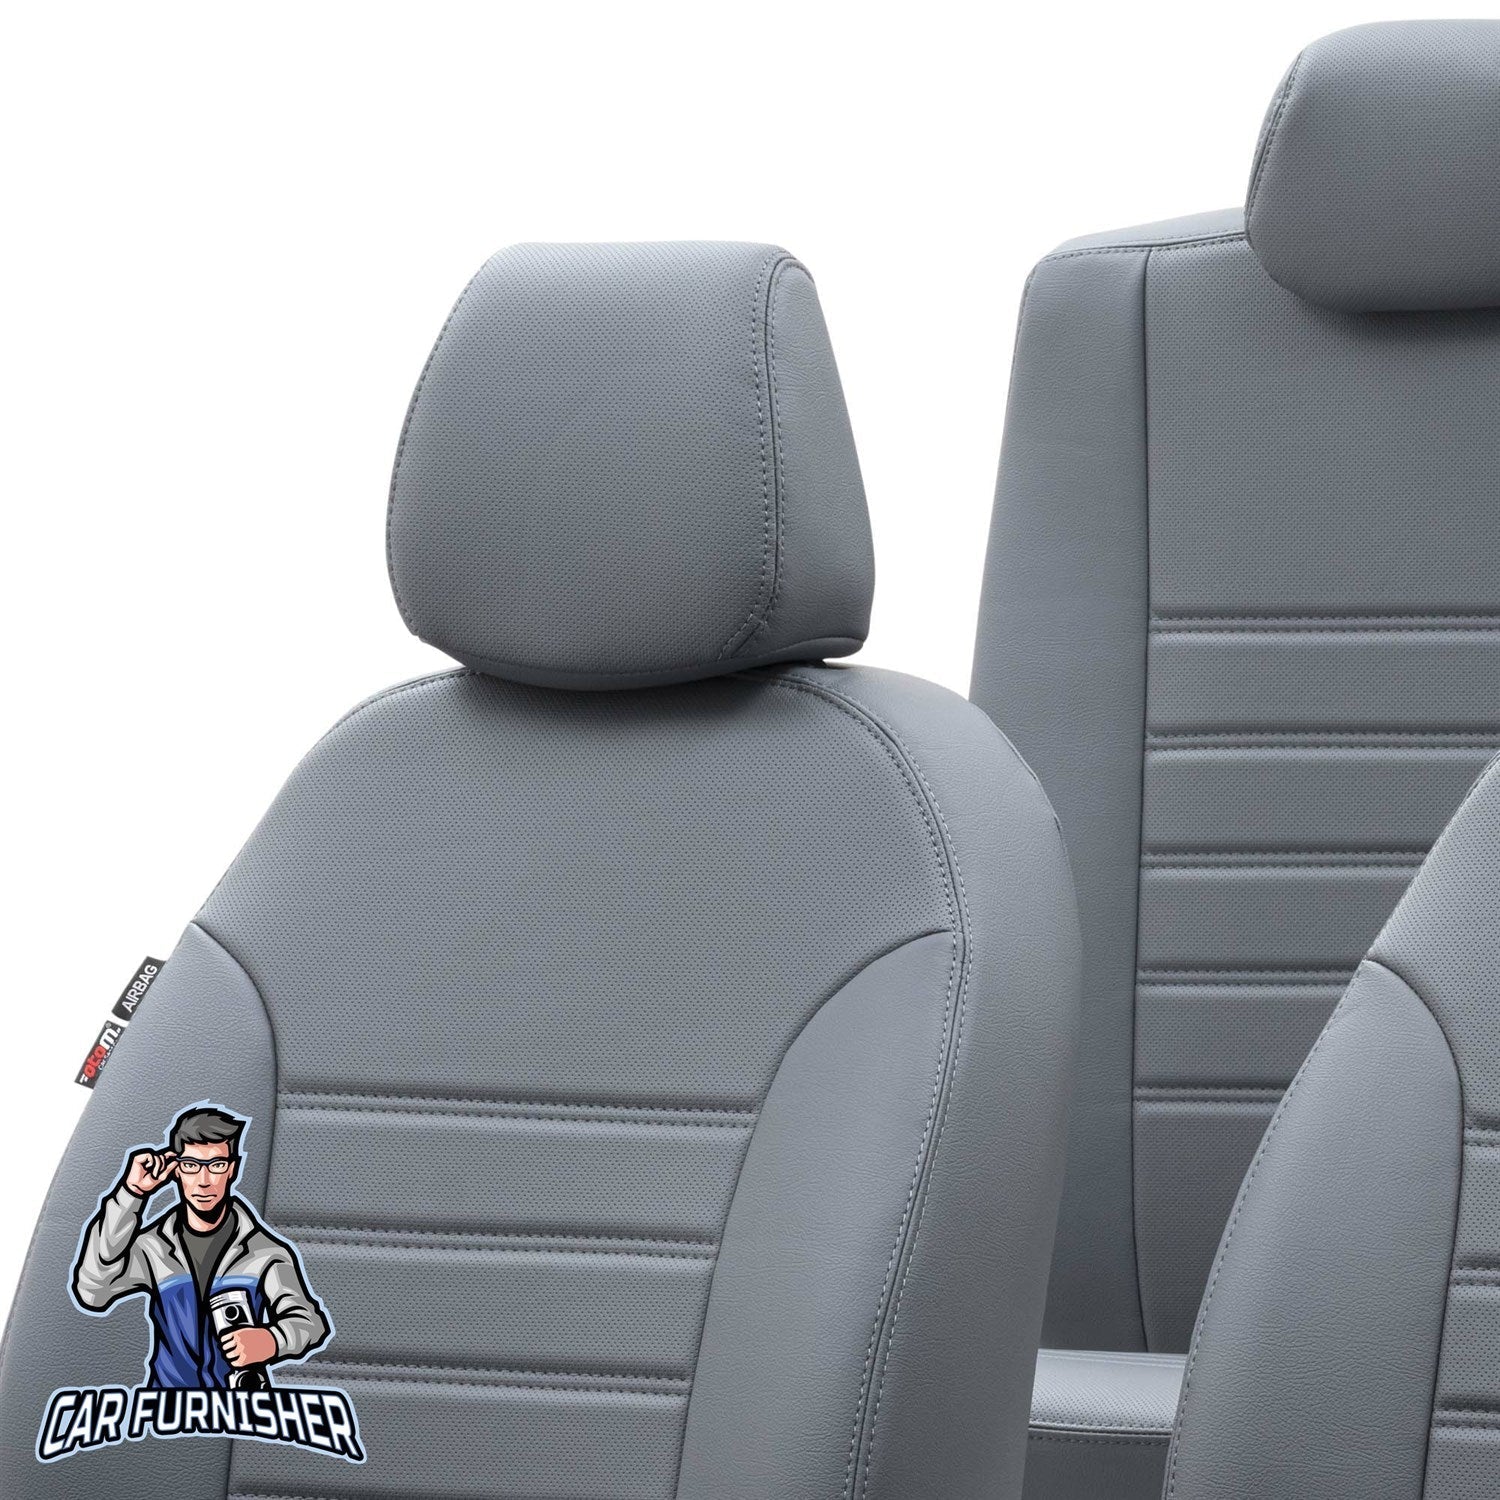 Chevrolet Tahoe Car Seat Covers 2007-2014 GMT/LS/LTZ Istanbul Smoked Full Set (5 Seats + Handrest) Leather & Fabric